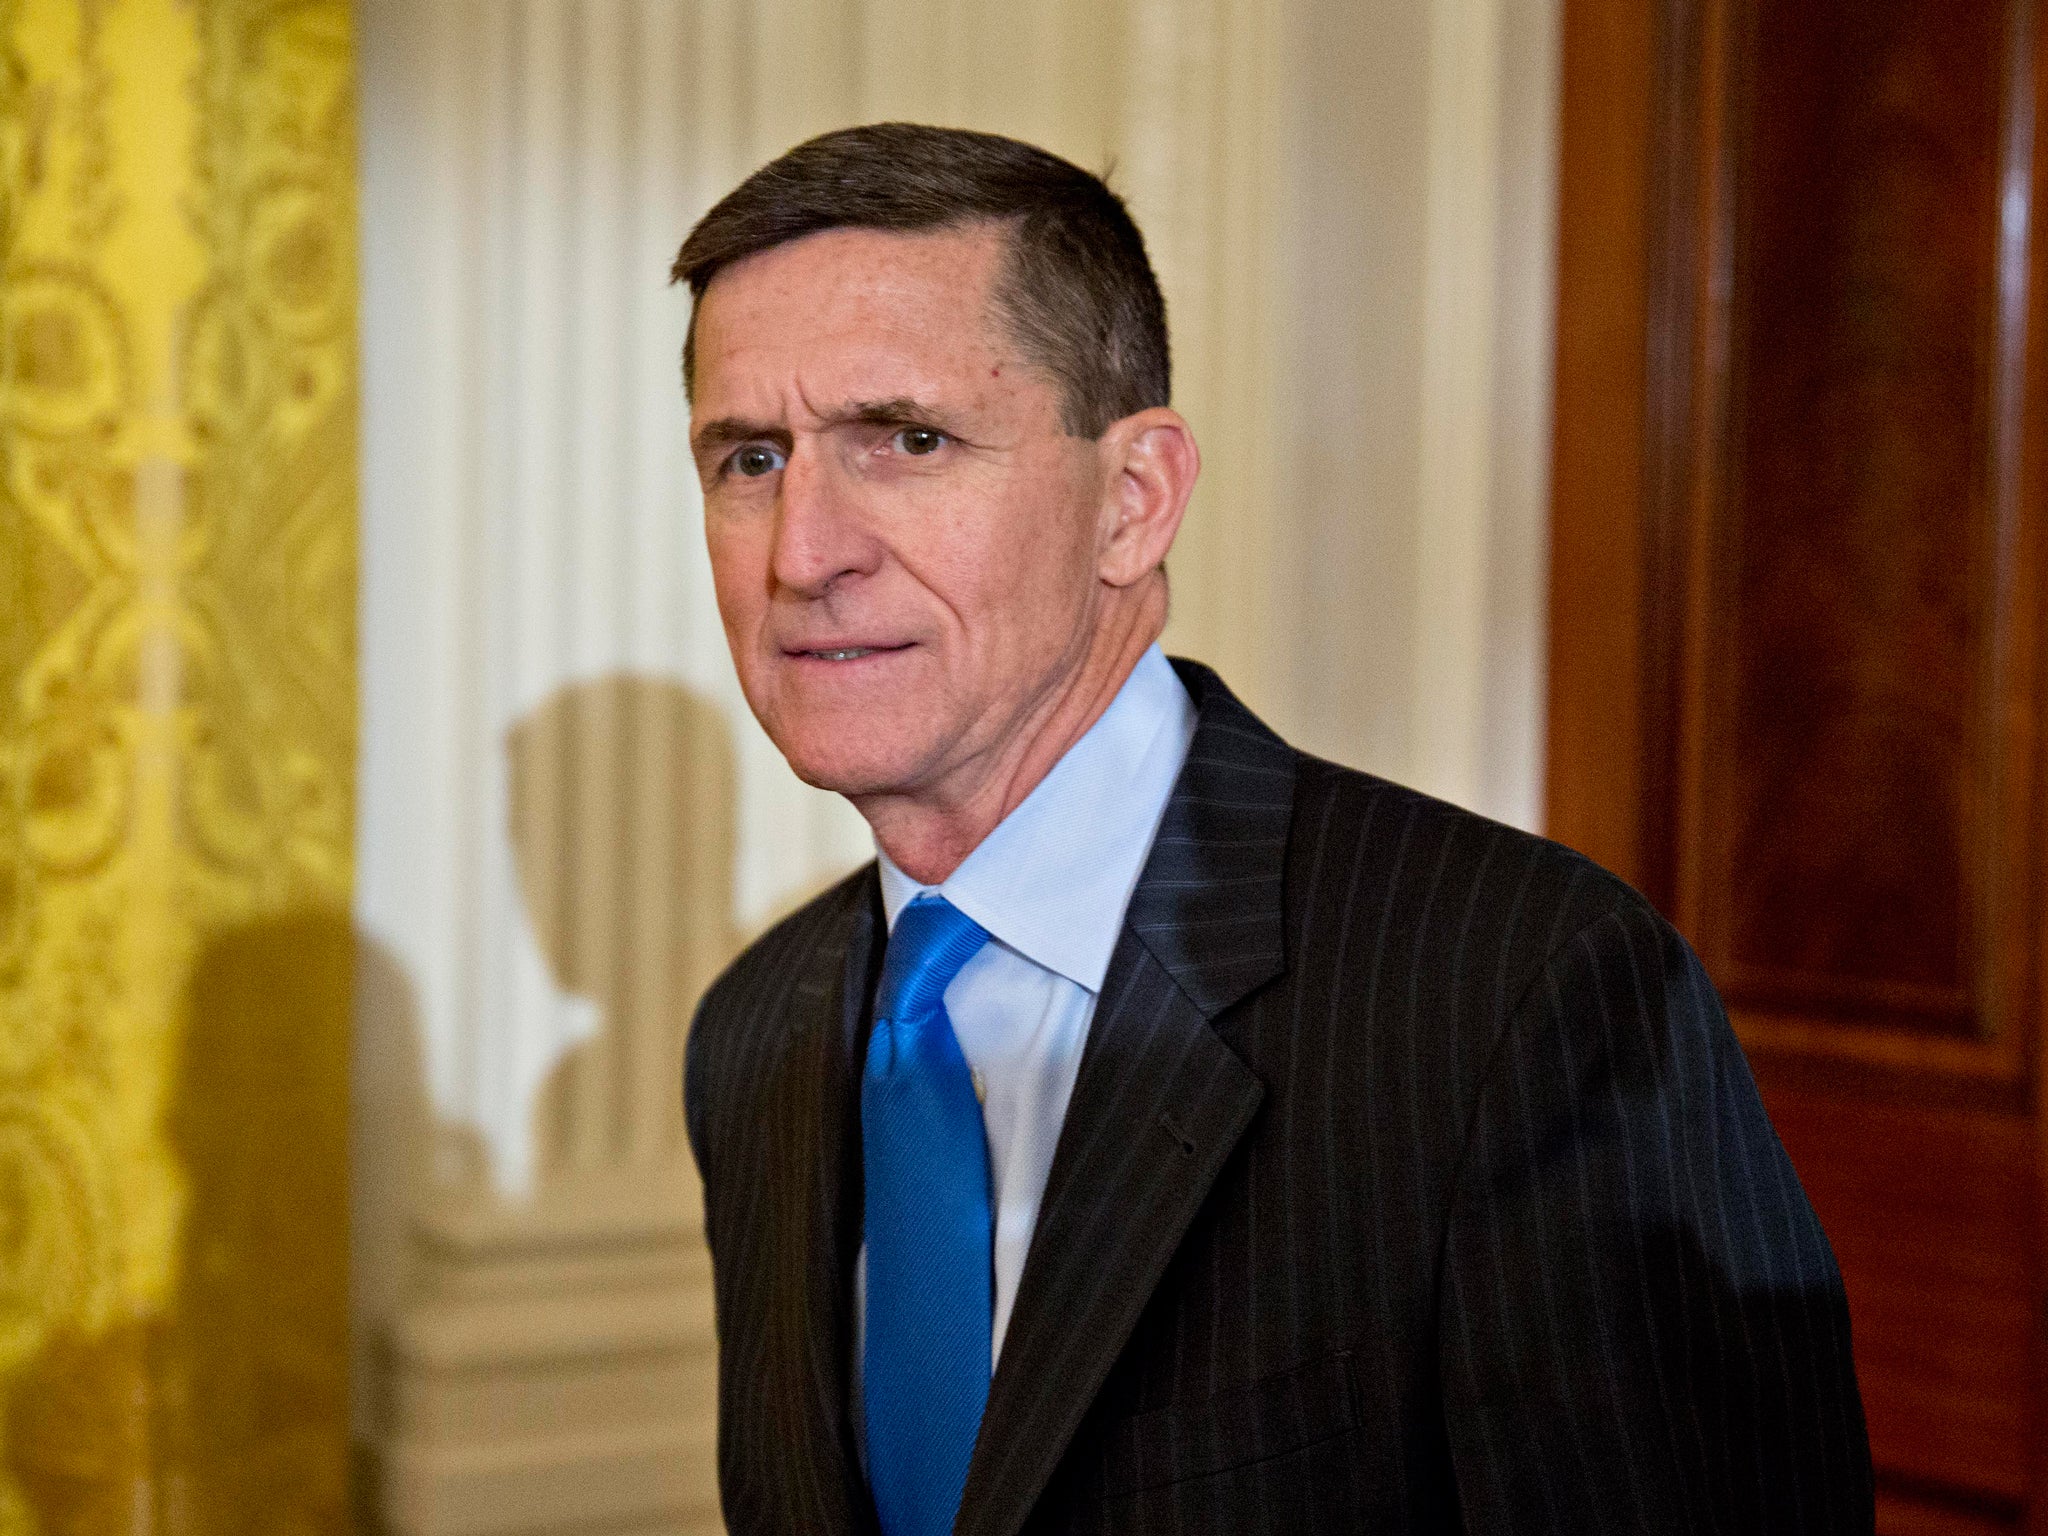 Michael Flynn arrives at swearing in ceremony for senior White House staff